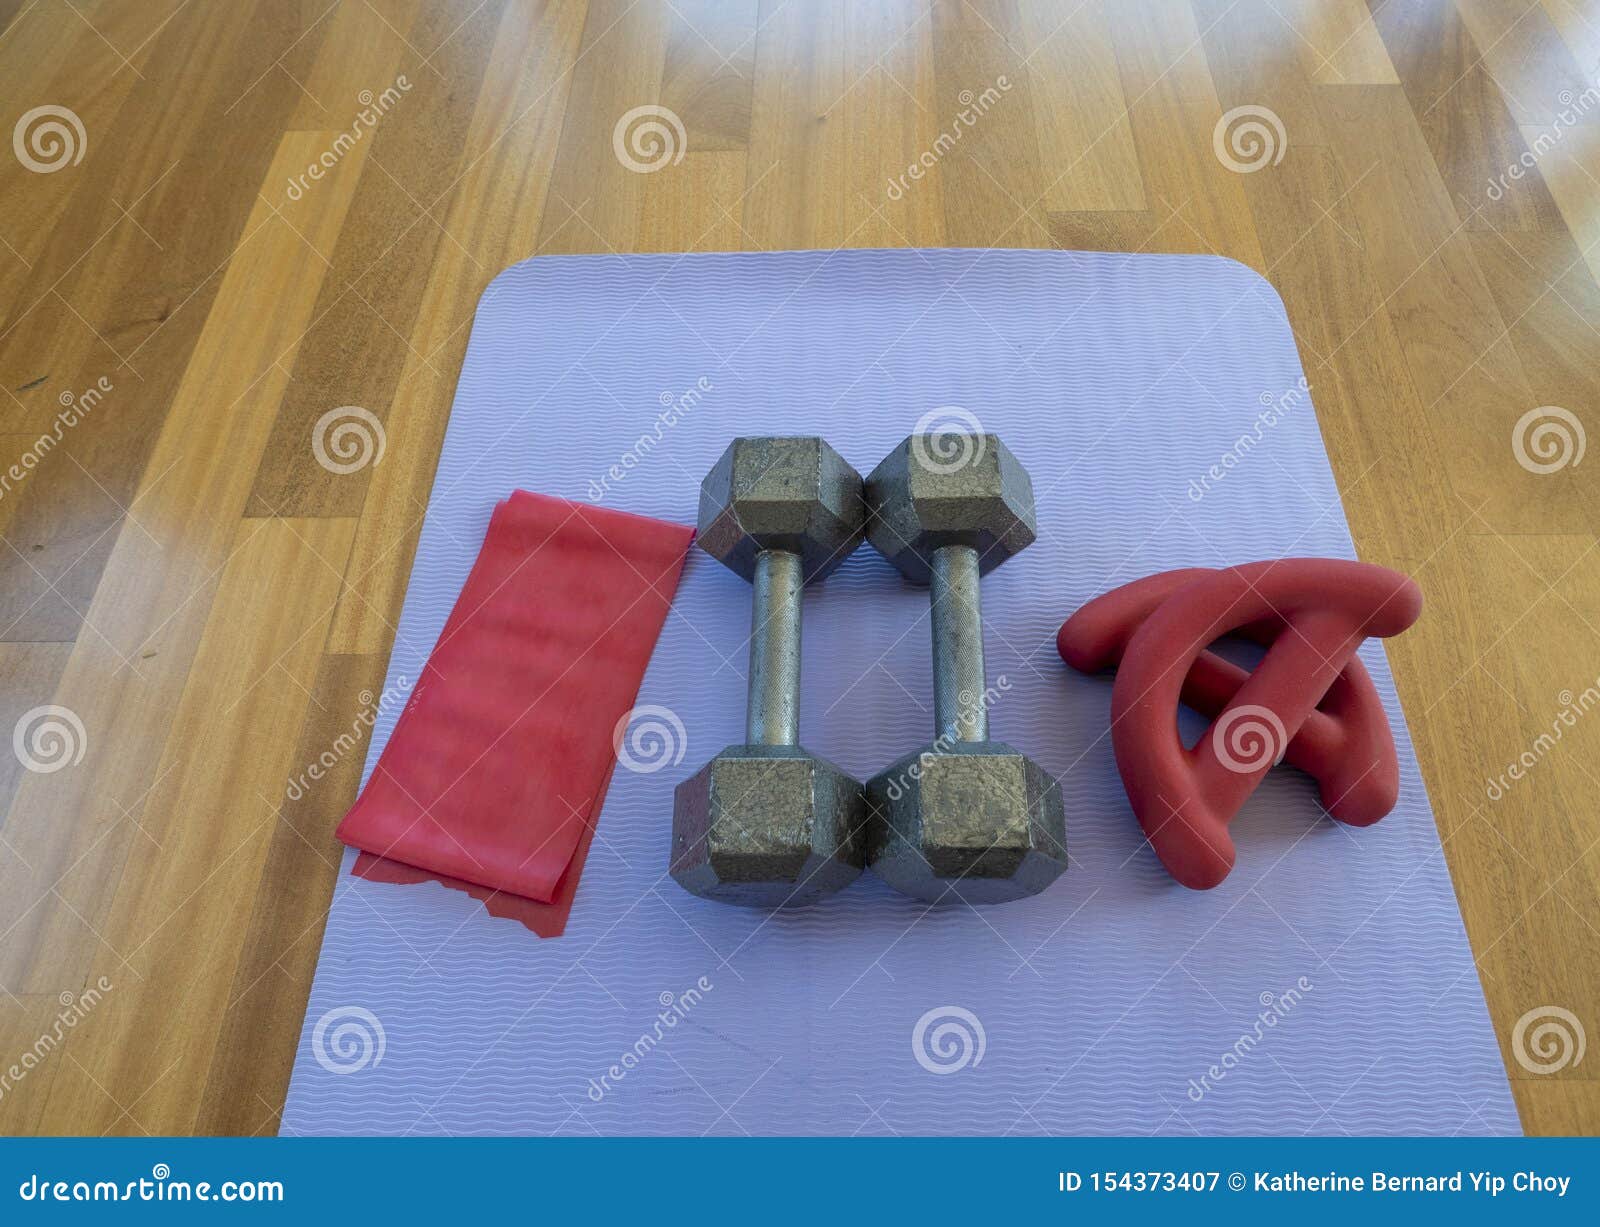 Overhead View Of A Pair Of Dumbbells Theraband Exercise Bands